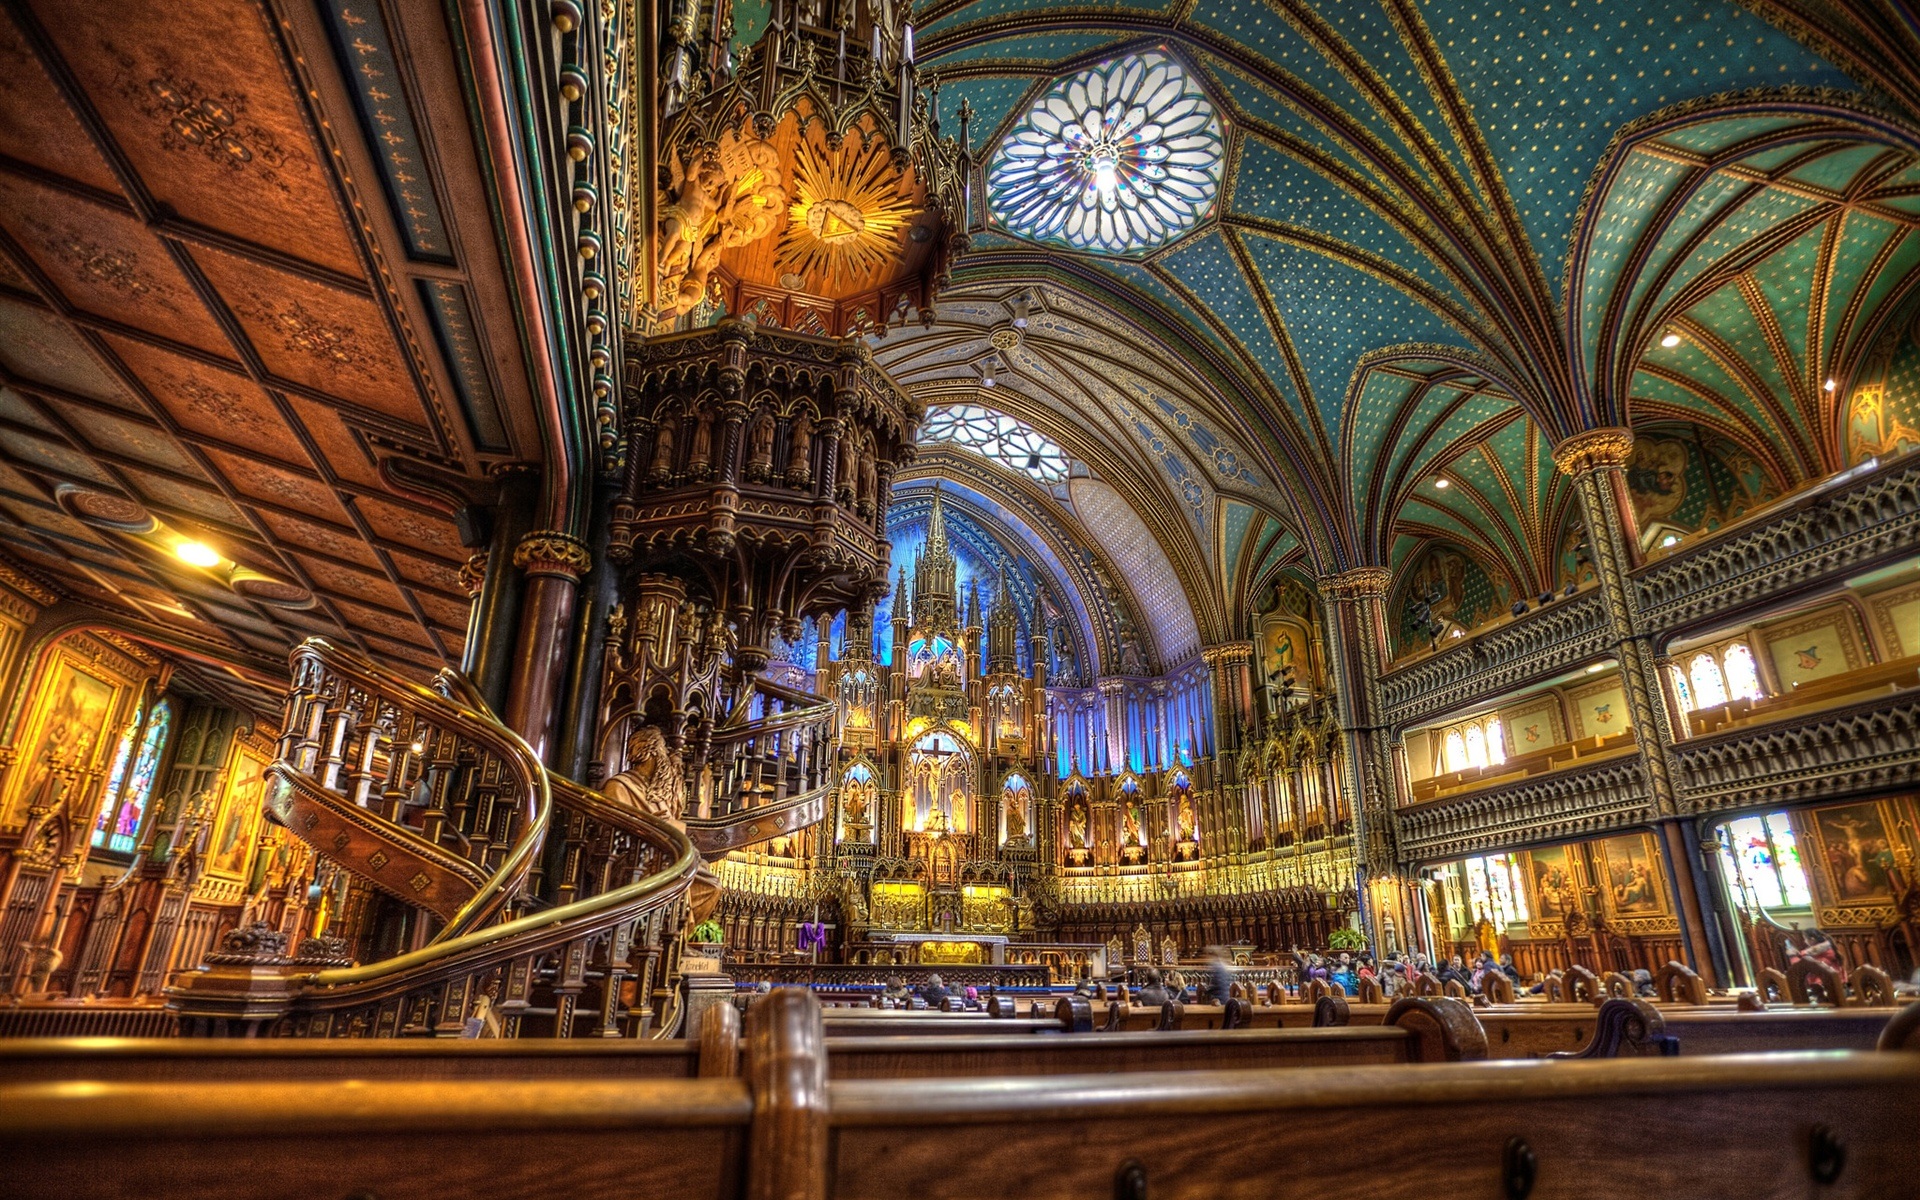 Wallpapers The Notre Dame Basilica, Indoor gorgeous scenery